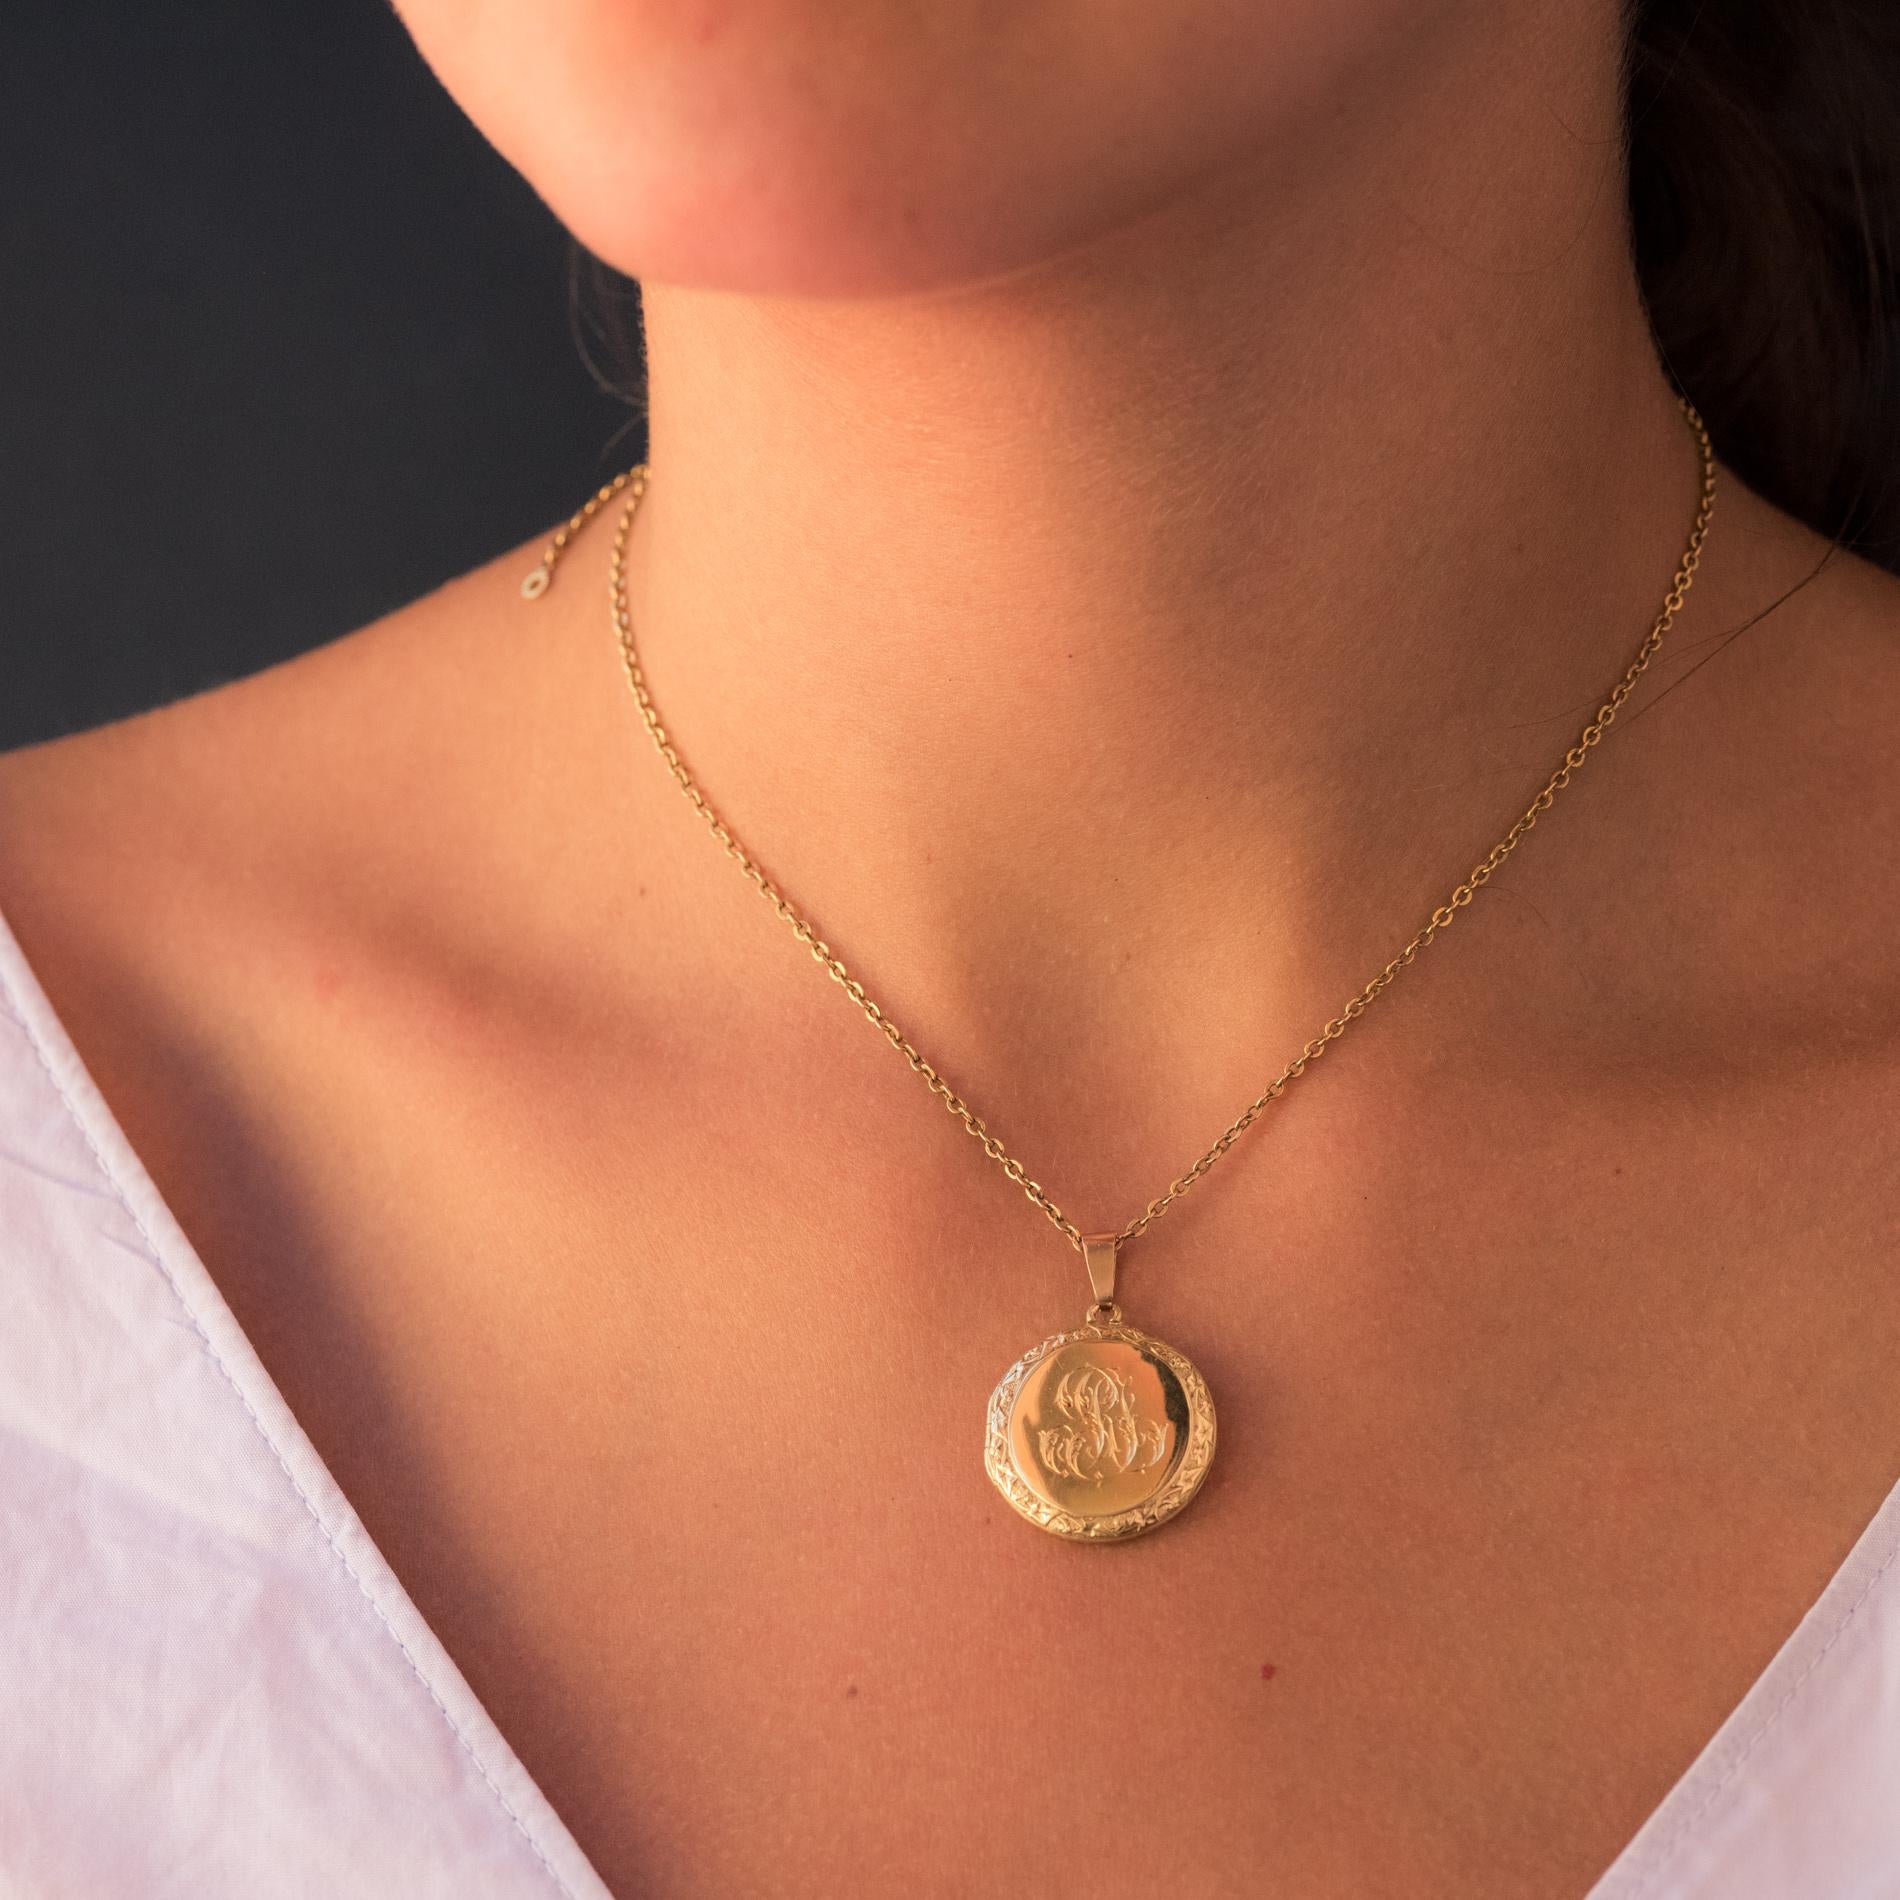 Pendant in 18 karat yellow gold, eagle's head hallmark.
Round in shape, this charming antique jewel of charm is engraved on its front face with a wreath of ivy leaves and in the center of initials. Its rear face is smooth. It opens with a small